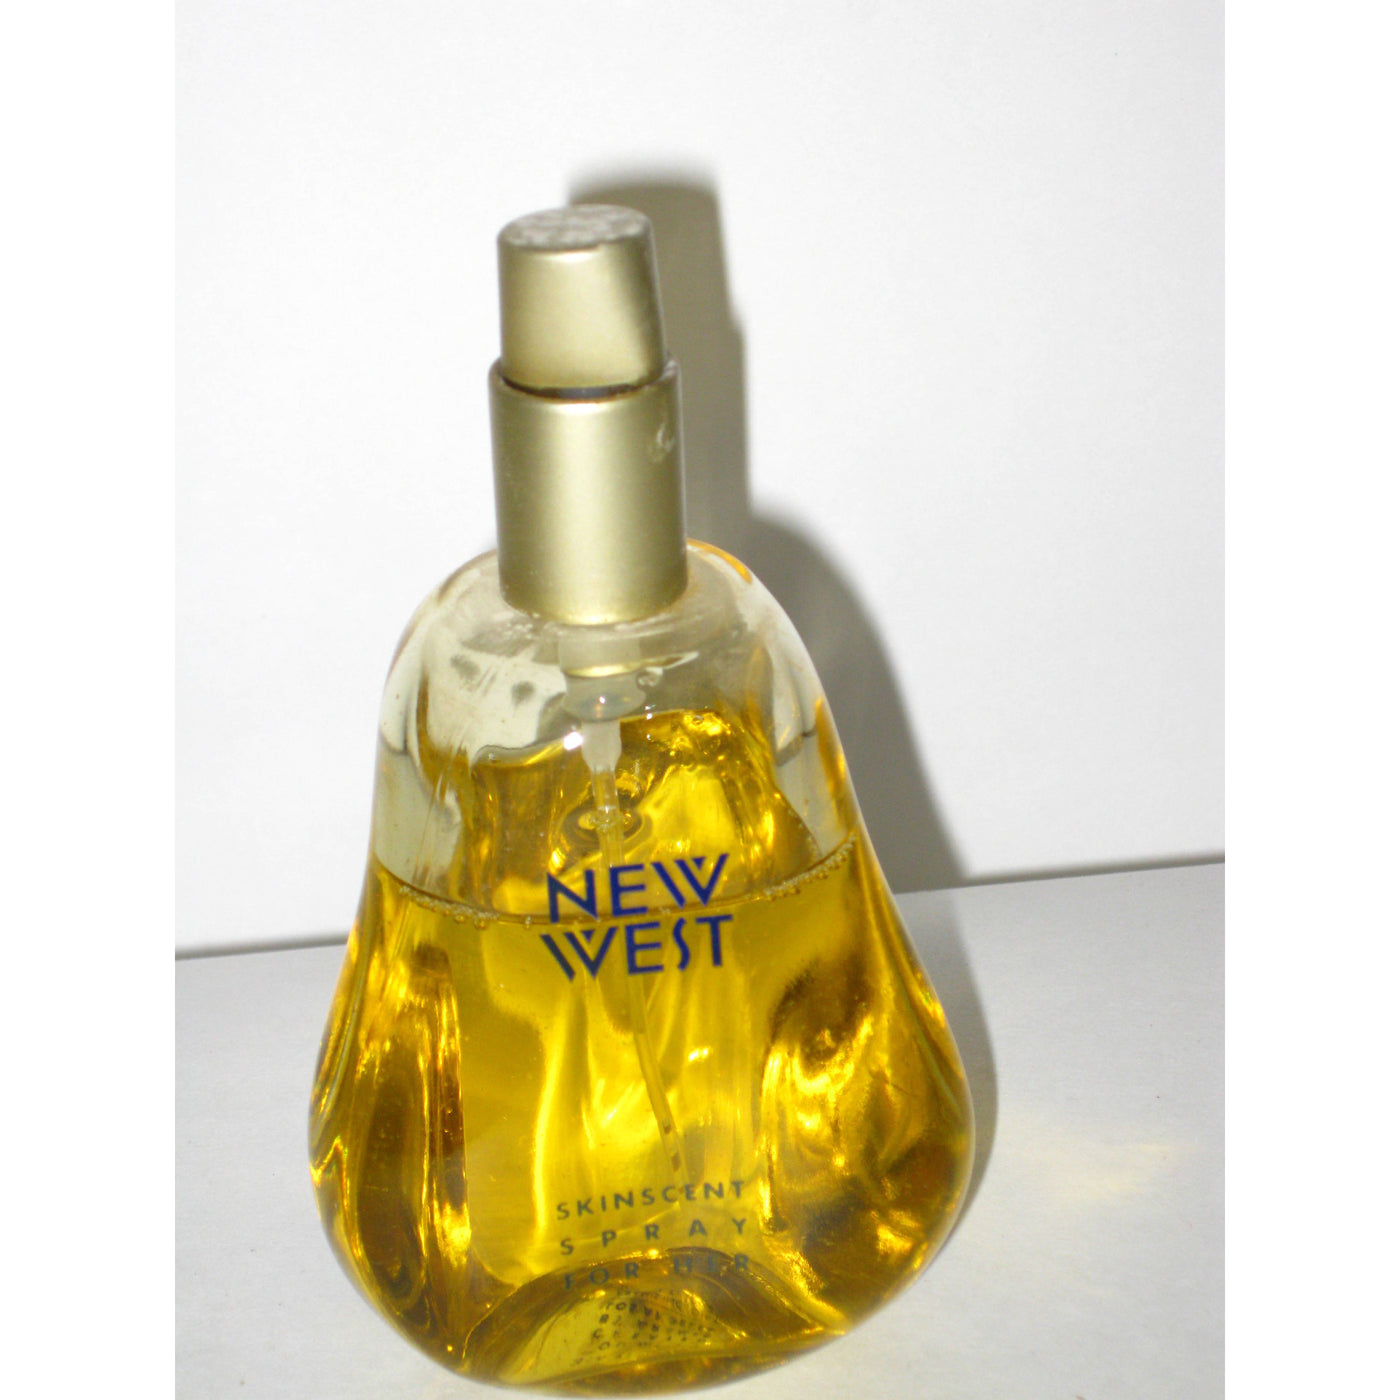 Vintage Aramis New West Scent Spray For Her